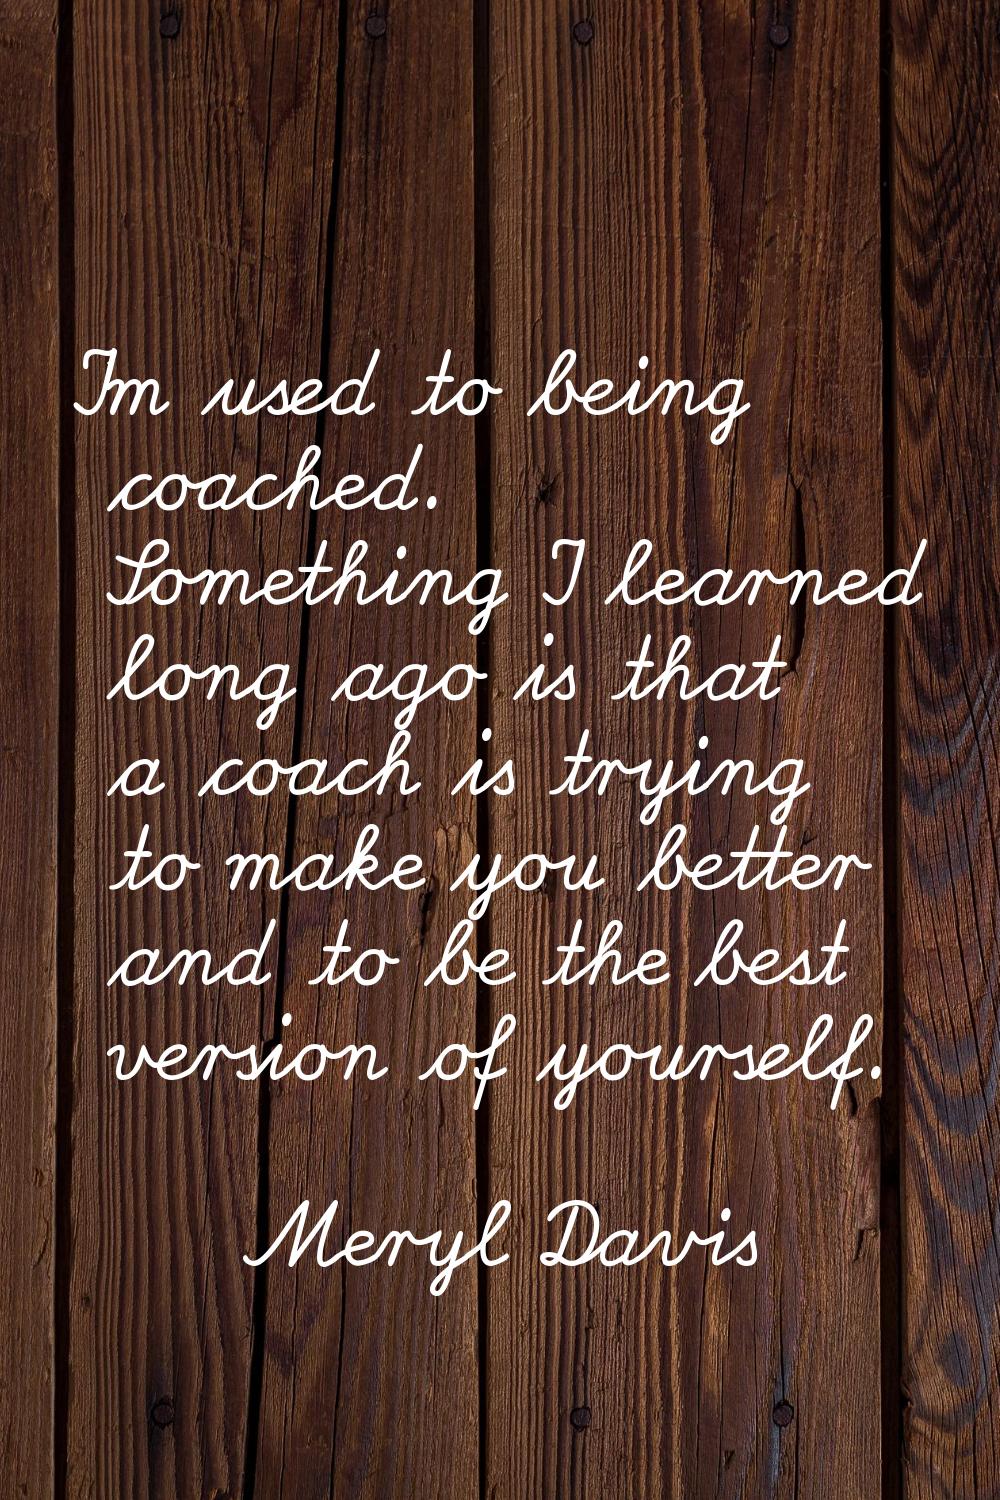 I'm used to being coached. Something I learned long ago is that a coach is trying to make you bette